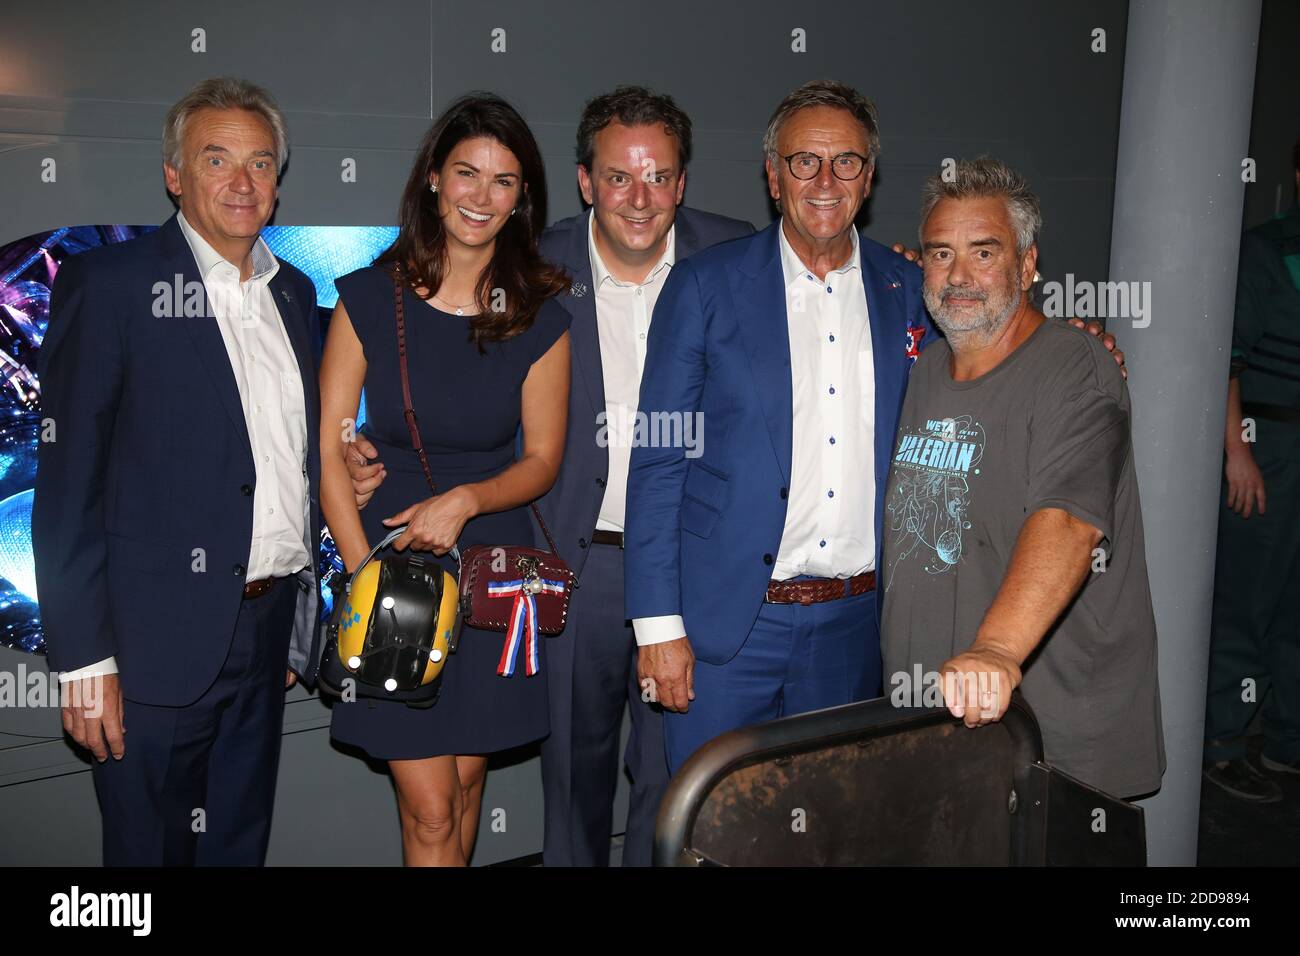 Jurgen Mack, Miriam Mack and her husband Michael Mack, Roland Mack and Luc Besson attending Eurosat - Coastiality By Valerian Opening held at Europa-Park in Rust, Germany on September 12, 2018. Photo by Jerome Domine/ABACAPRESS.COM Stock Photo